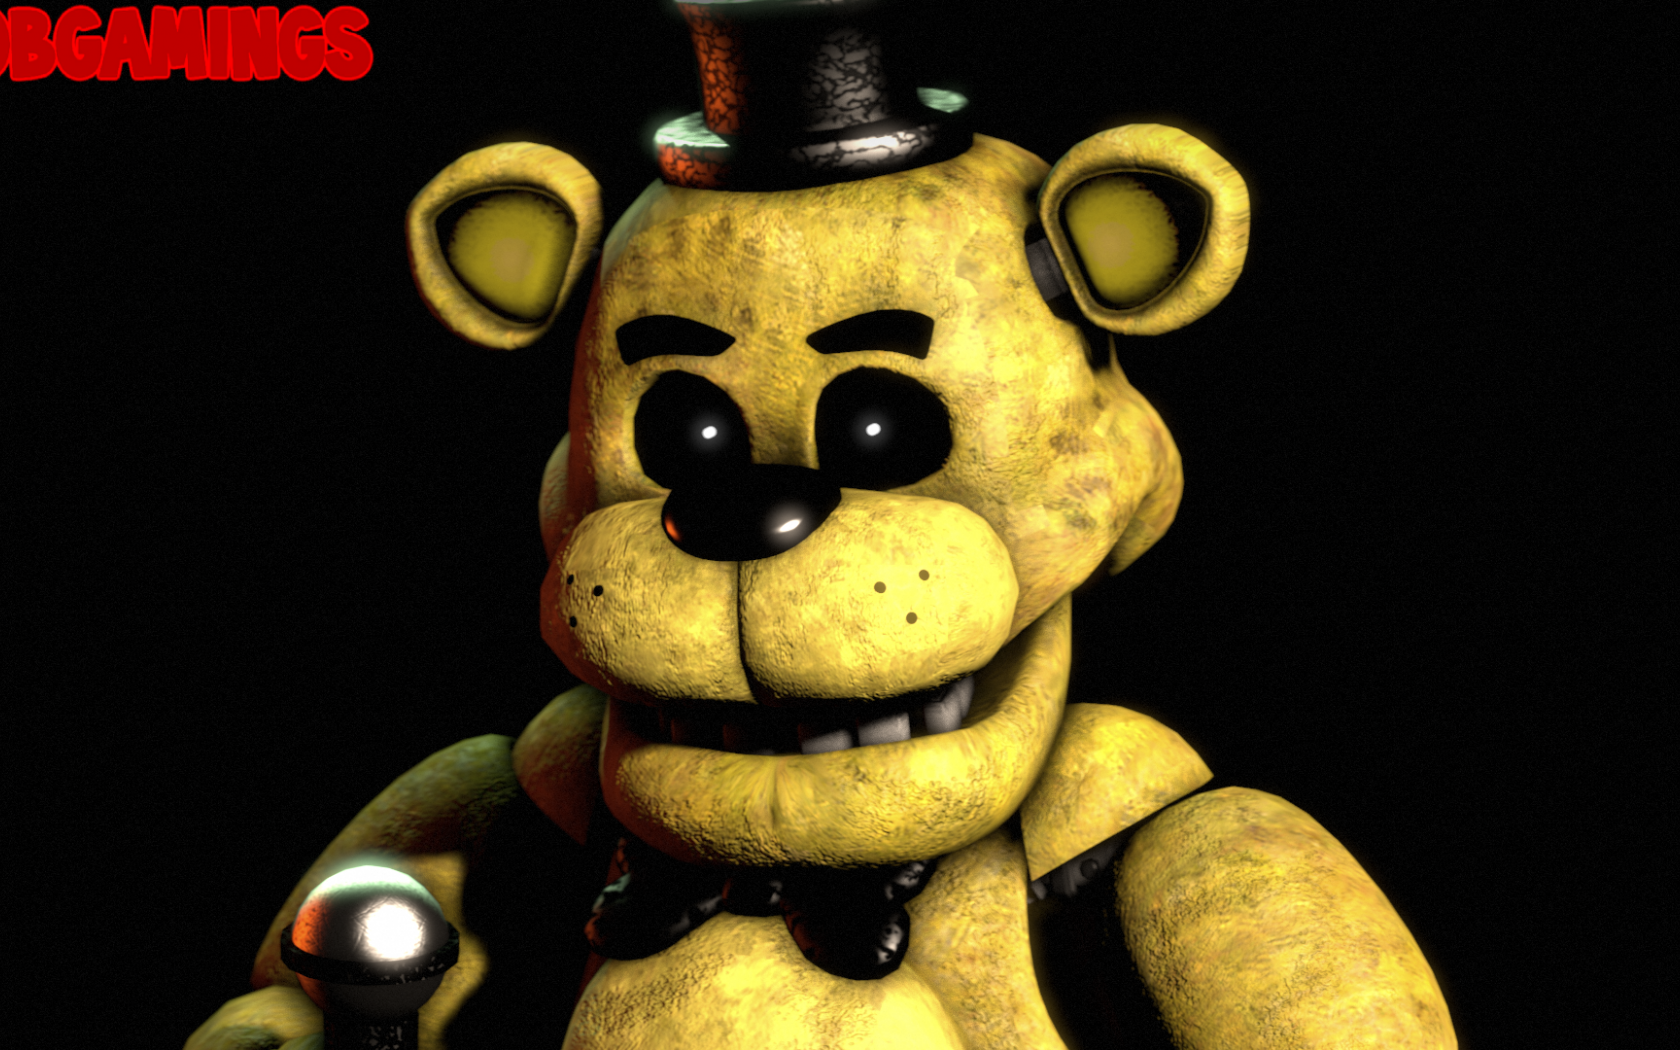 Free download [SFM] Golden Freddy by RobGamings [1920x1080] for your Desktop, Mobile & Tablet. Explore Golden Freddy Wallpaper. Golden Freddy Wallpaper, Springtrap X Golden Freddy Wallpaper, Funtime Freddy Wallpaper